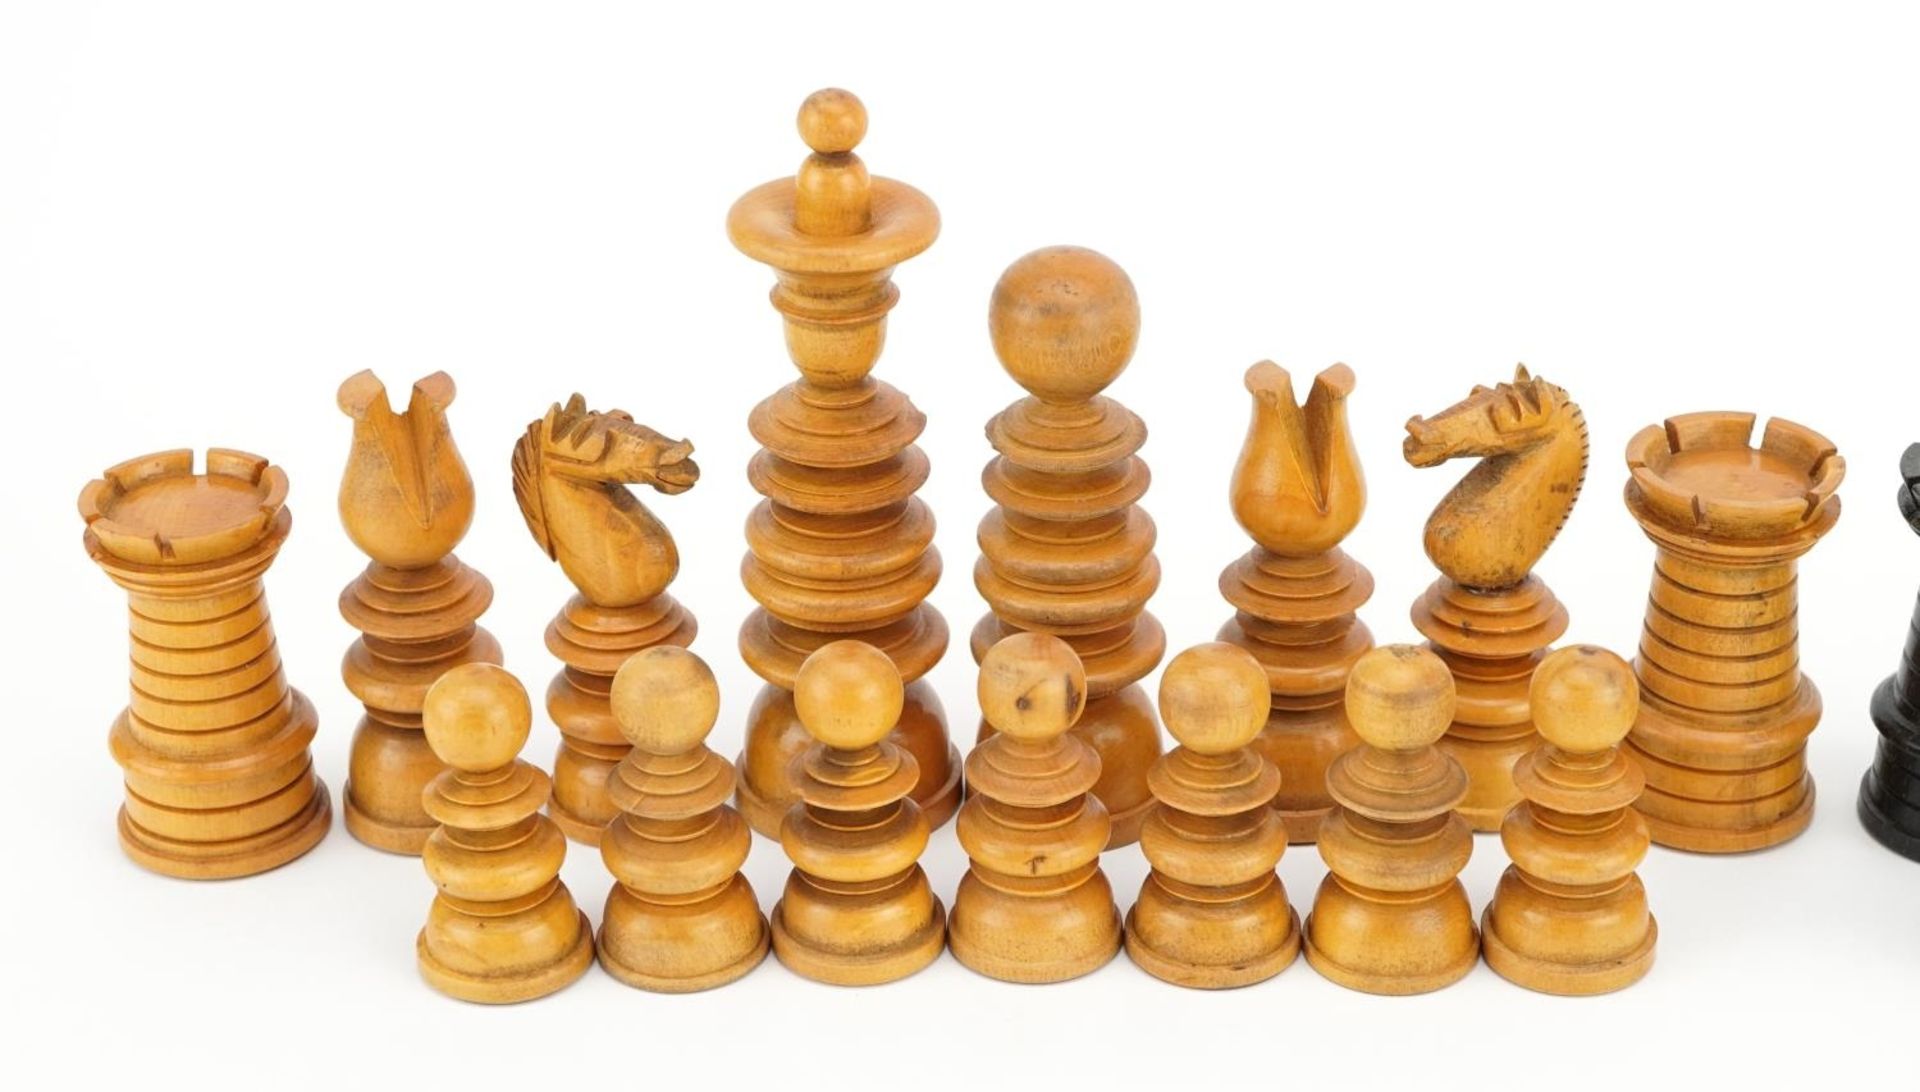 Manner of Jaques, boxwood and ebony Chessmen pattern part chess set, the largest pieces each 11cm - Image 2 of 6